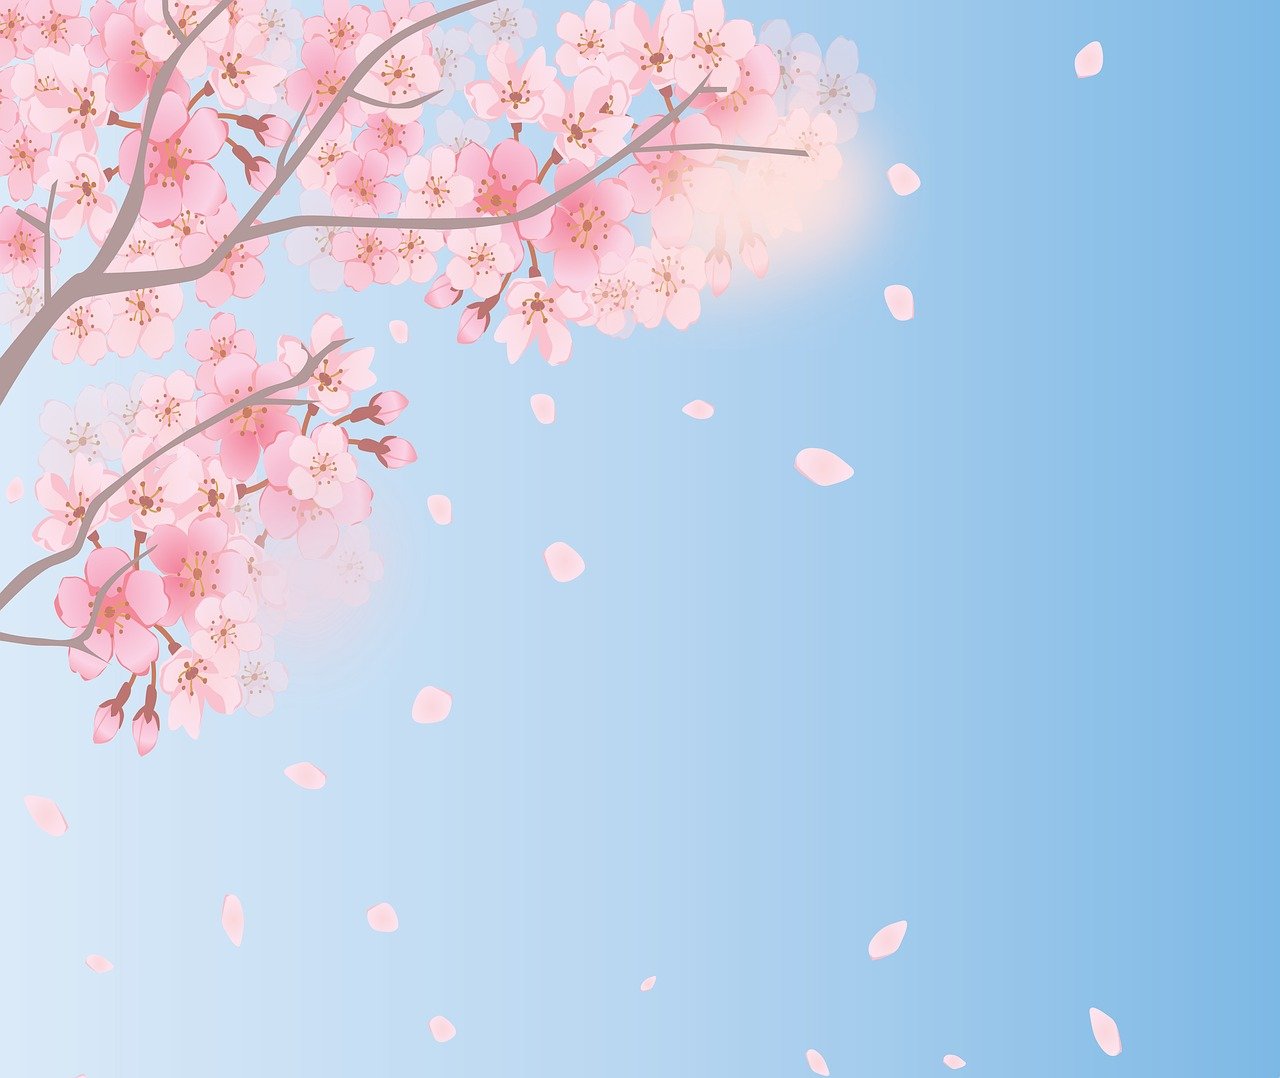 a tree with pink flowers blowing in the wind, an illustration of, trending on pixabay, sōsaku hanga, light blue clear sky, flowing sakura-colored silk, full view blank background, there is one cherry